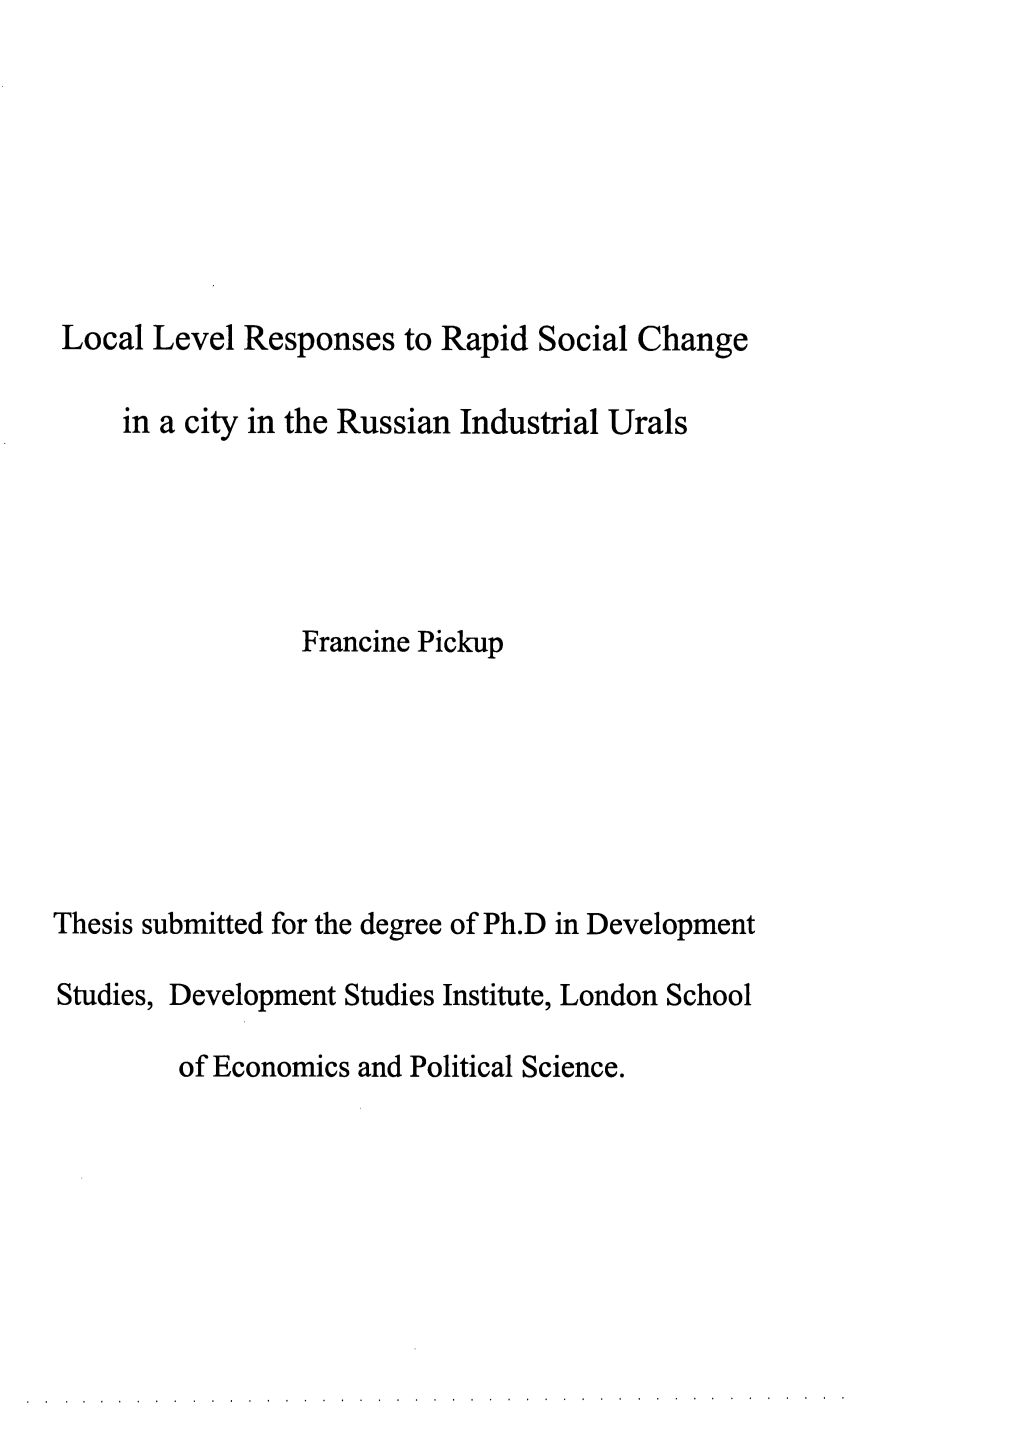 Local Level Responses to Rapid Social Change in a City in The